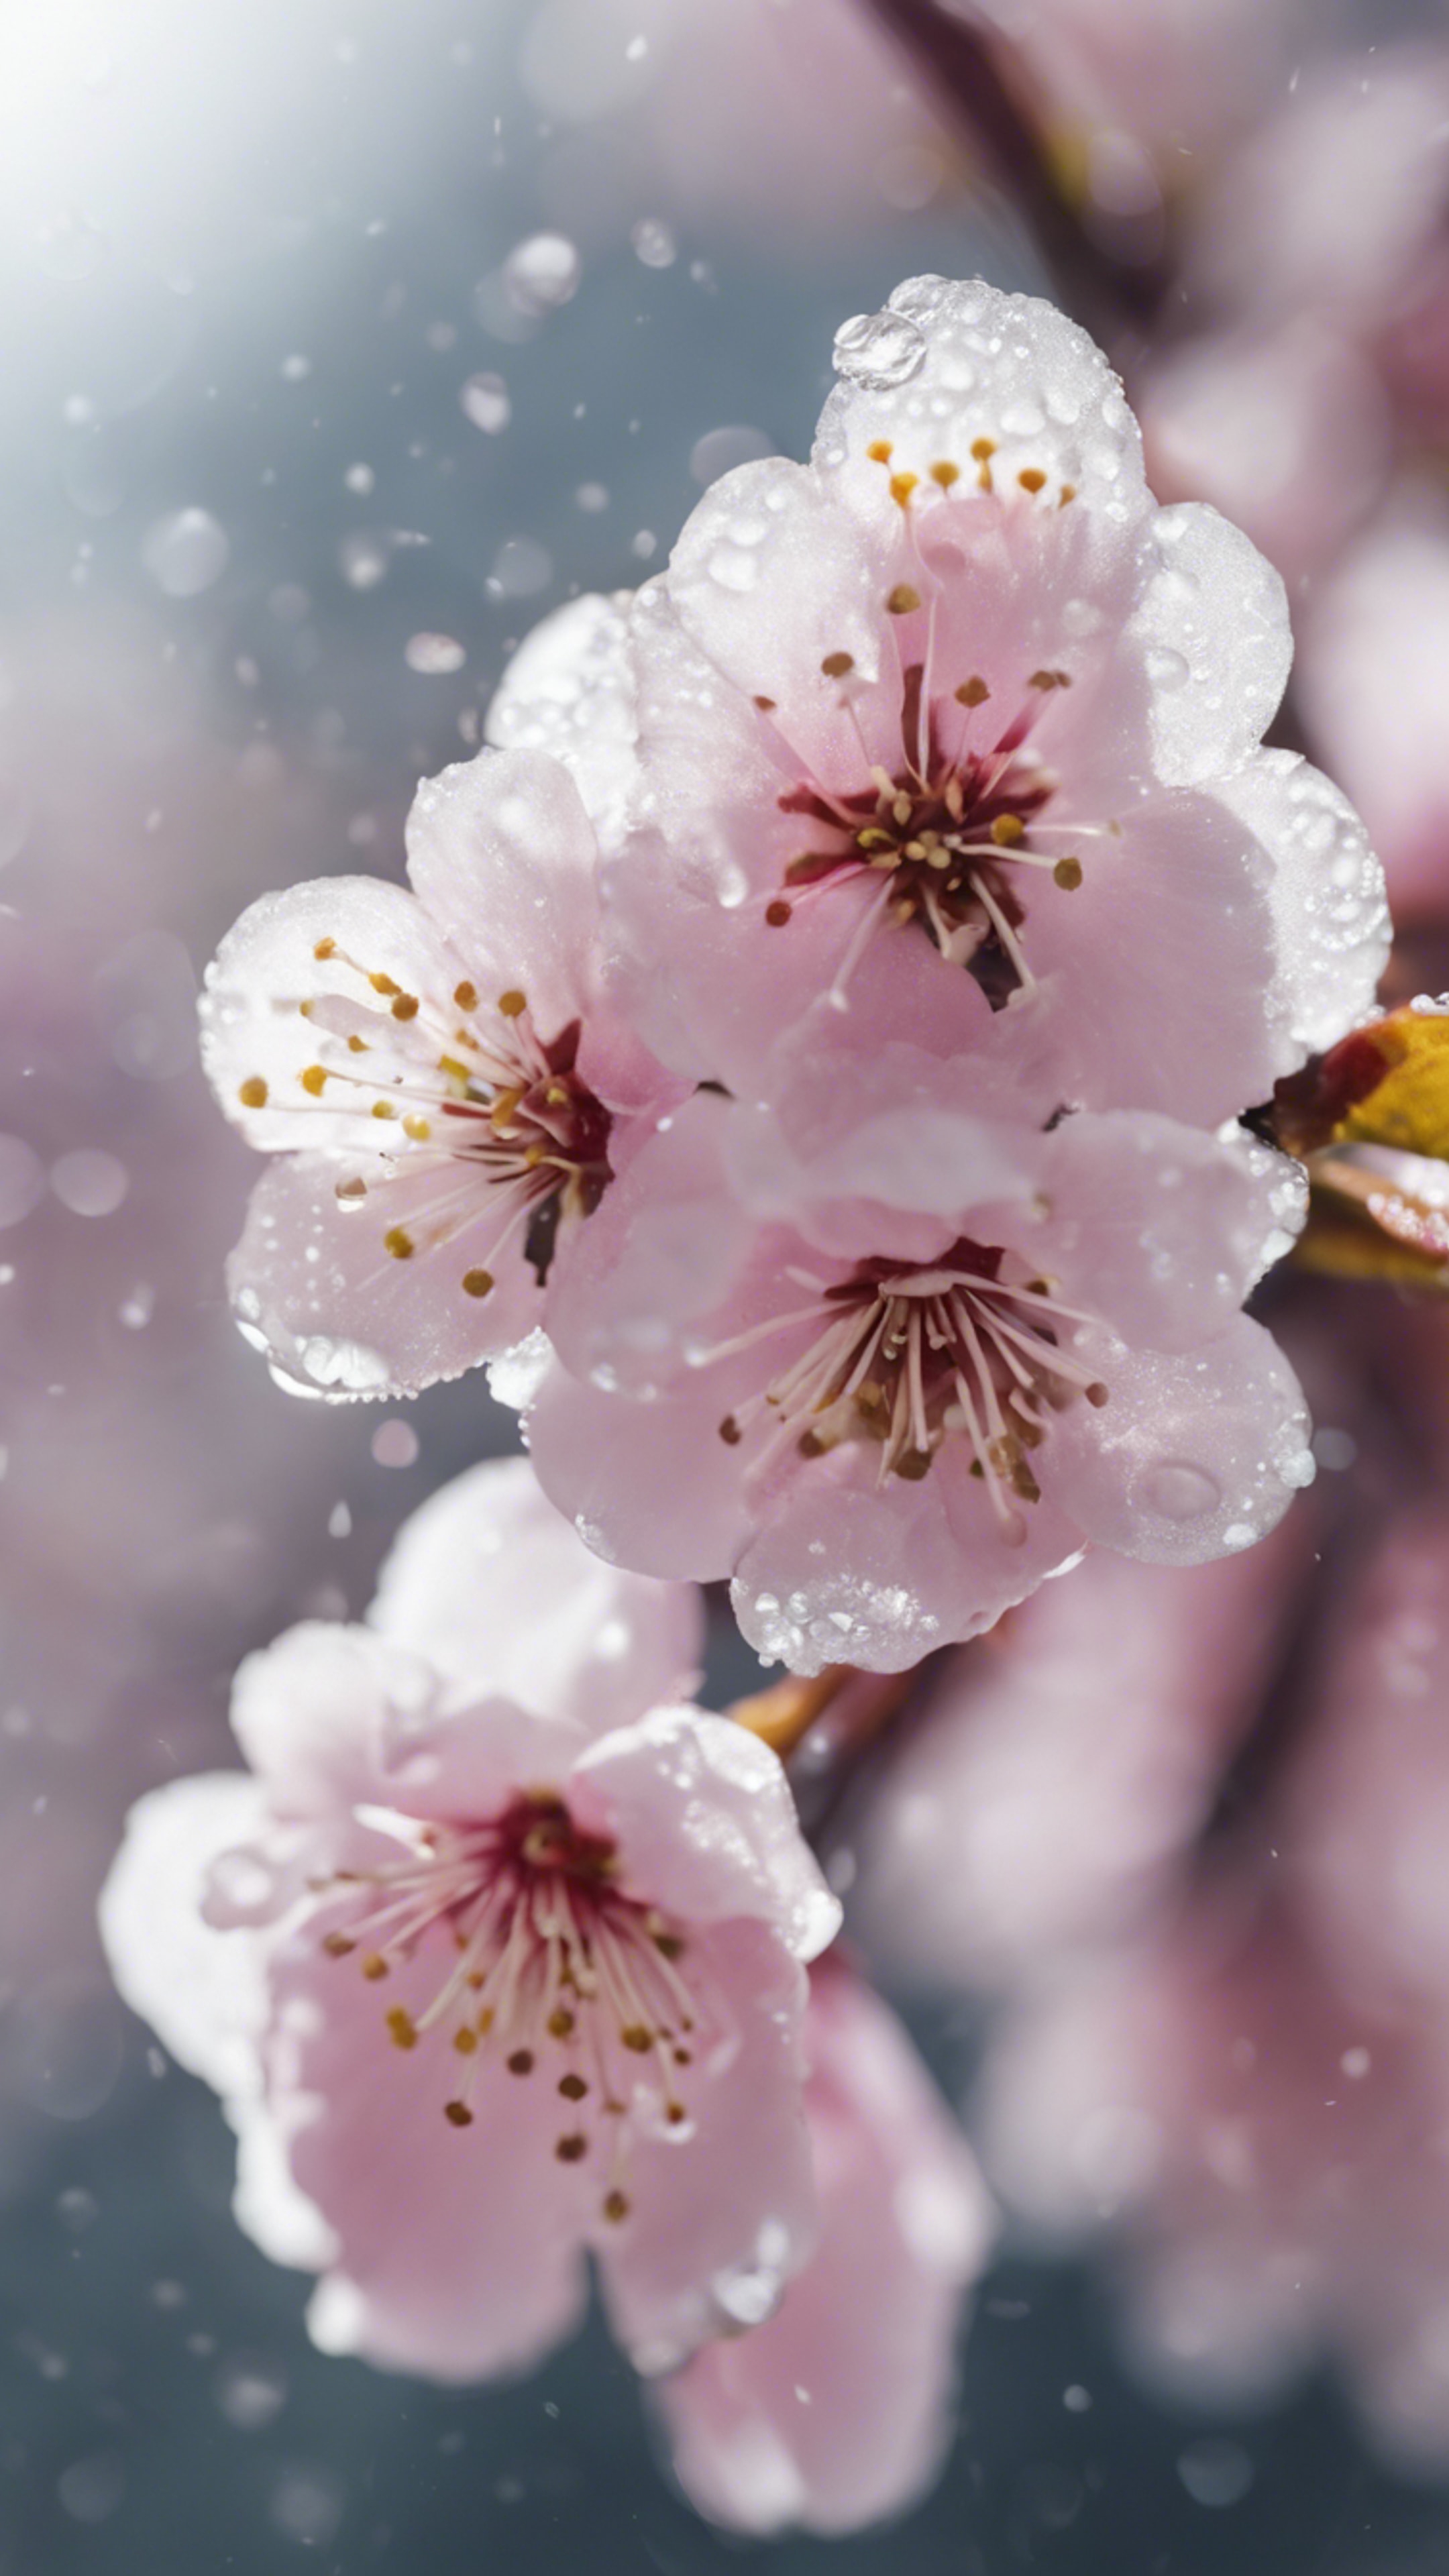 A closeup image of a freshly blooming cherry blossom, speckled with dew drops. วอลล์เปเปอร์[d7e9cc65cc424f509aa2]